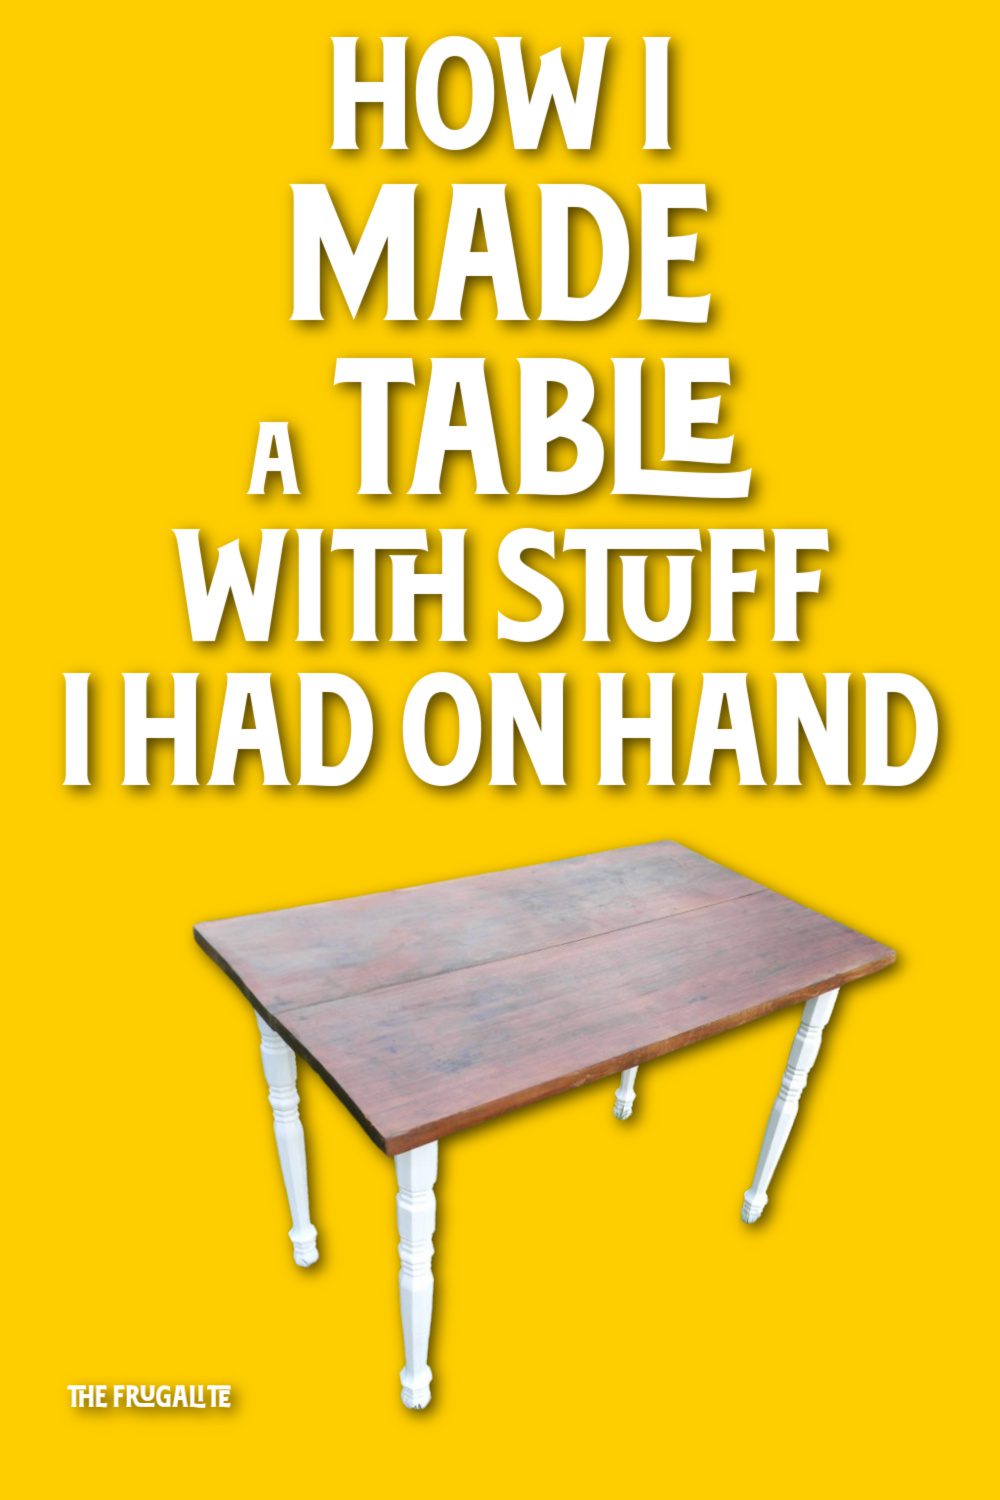 How I Made a Table with Stuff I Had on Hand